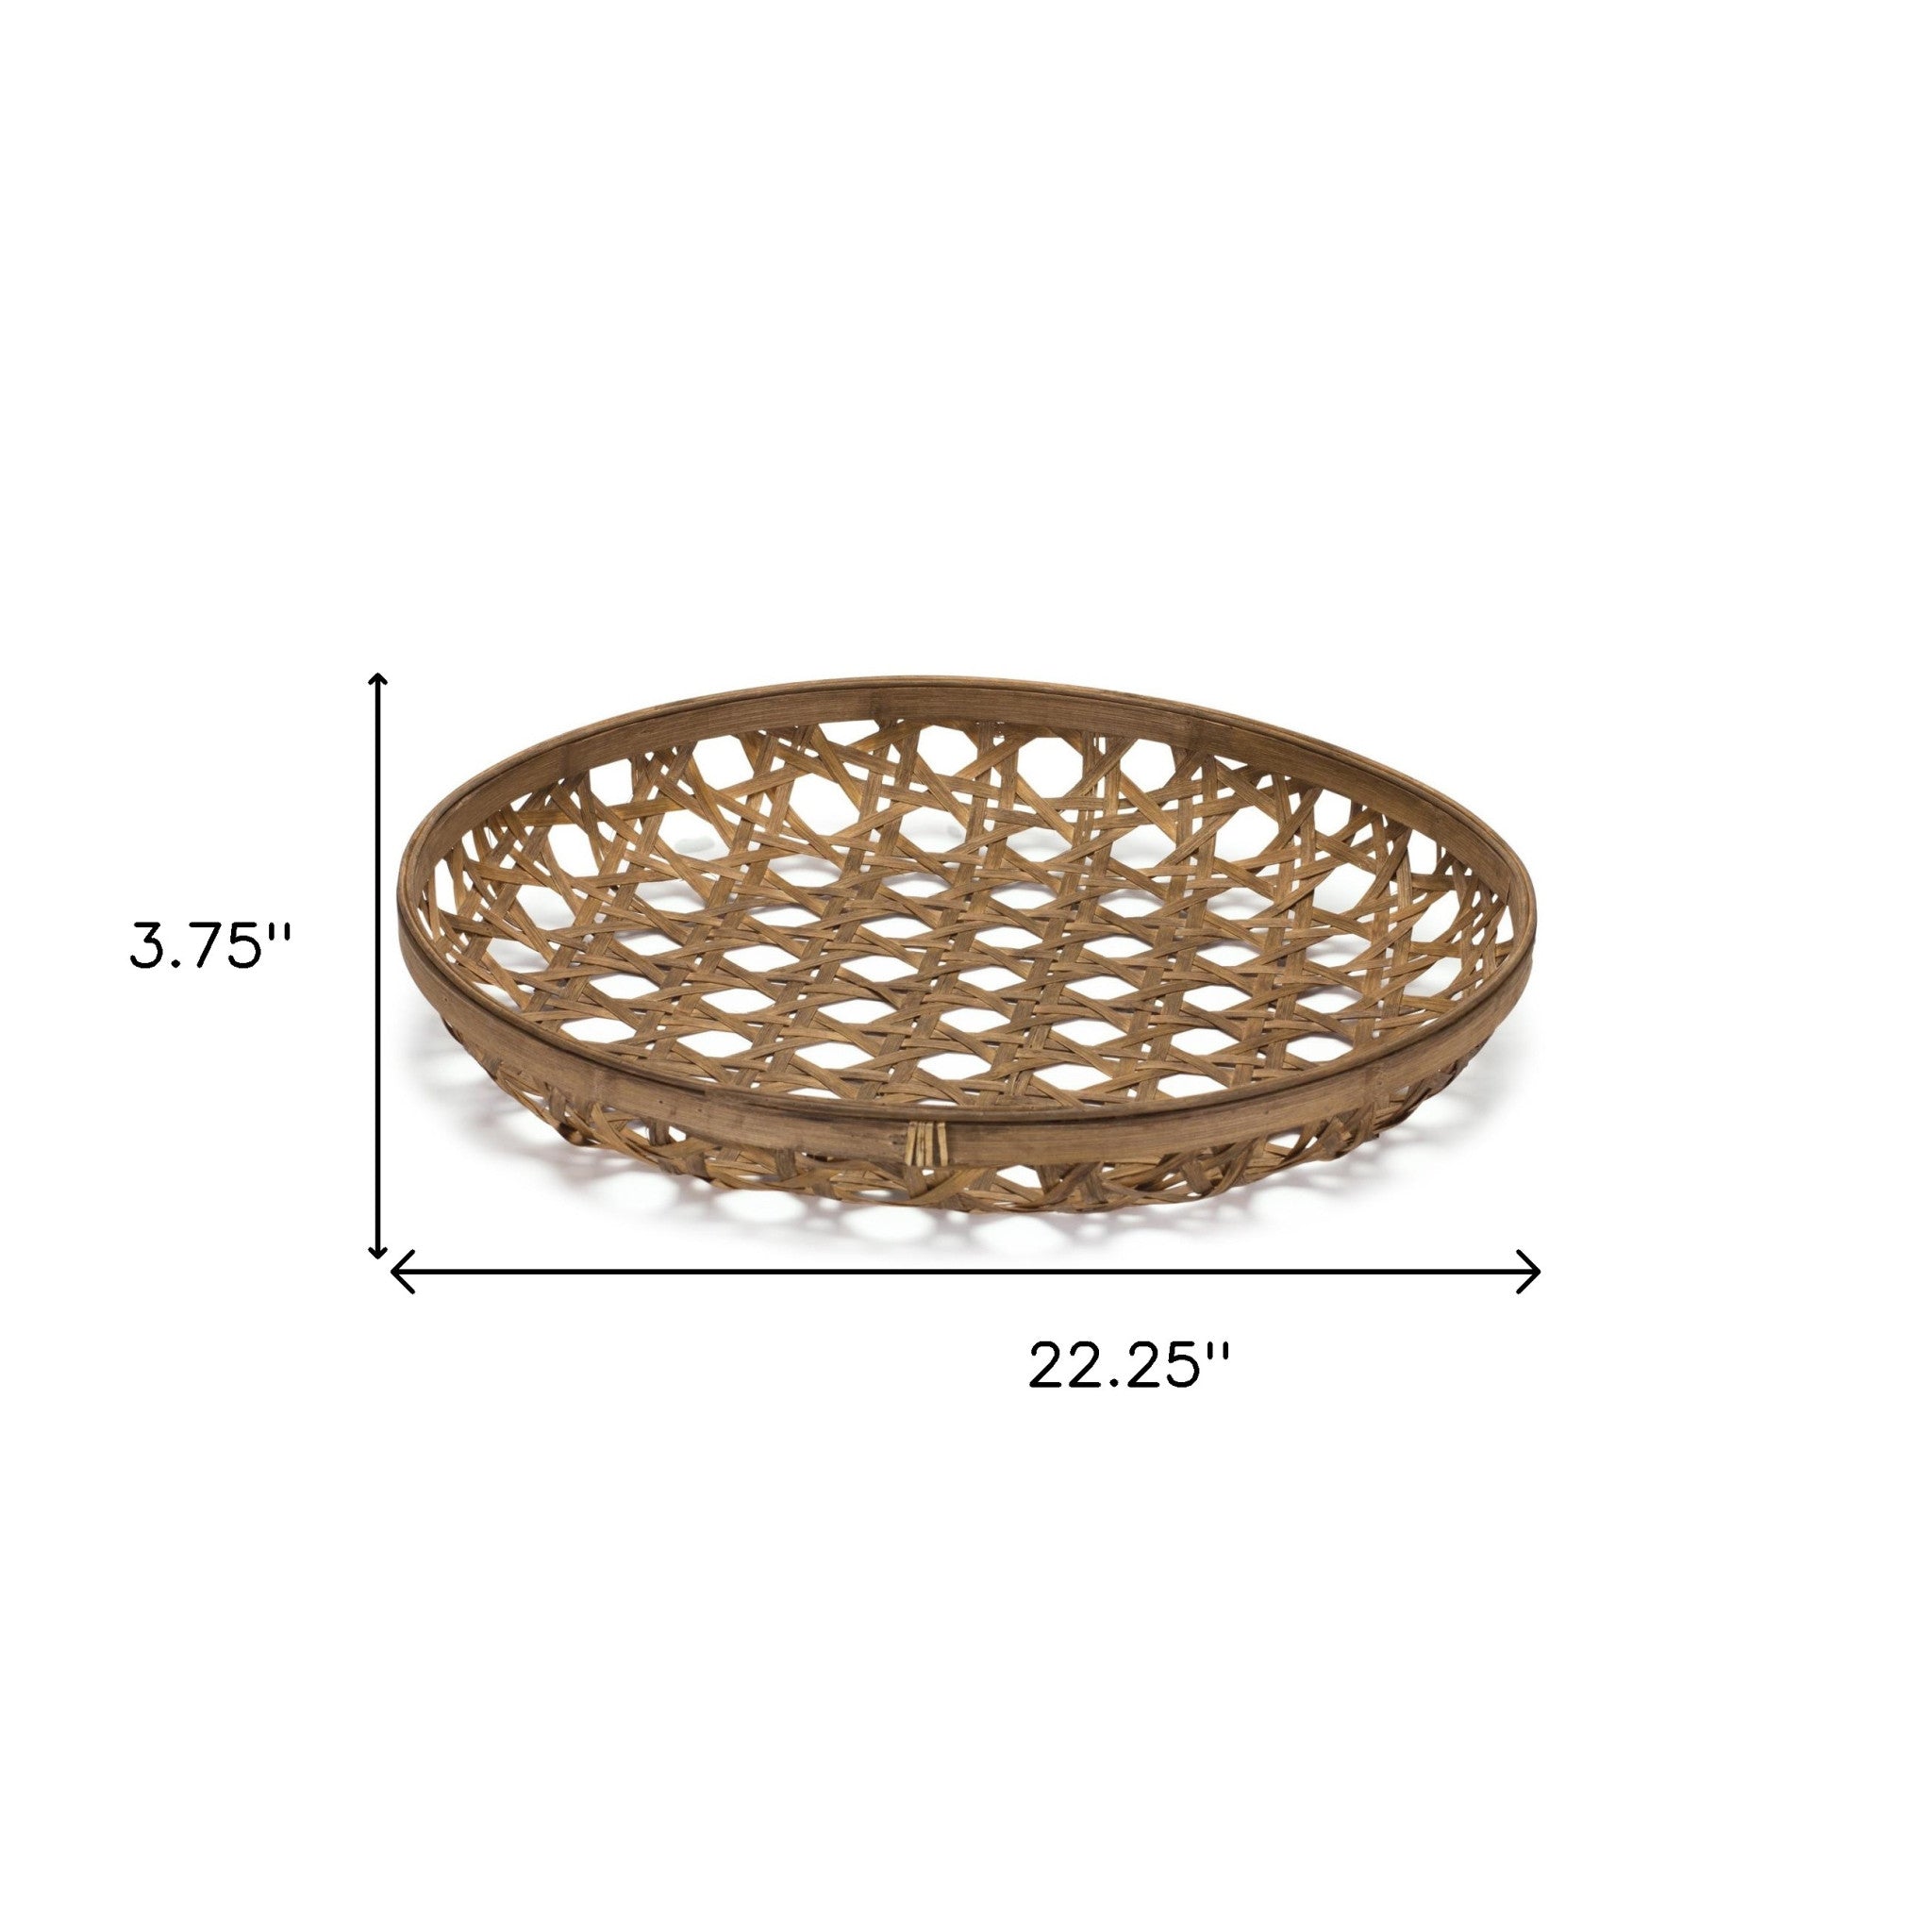 22" Brown Bamboo Weave Round Wood Tray